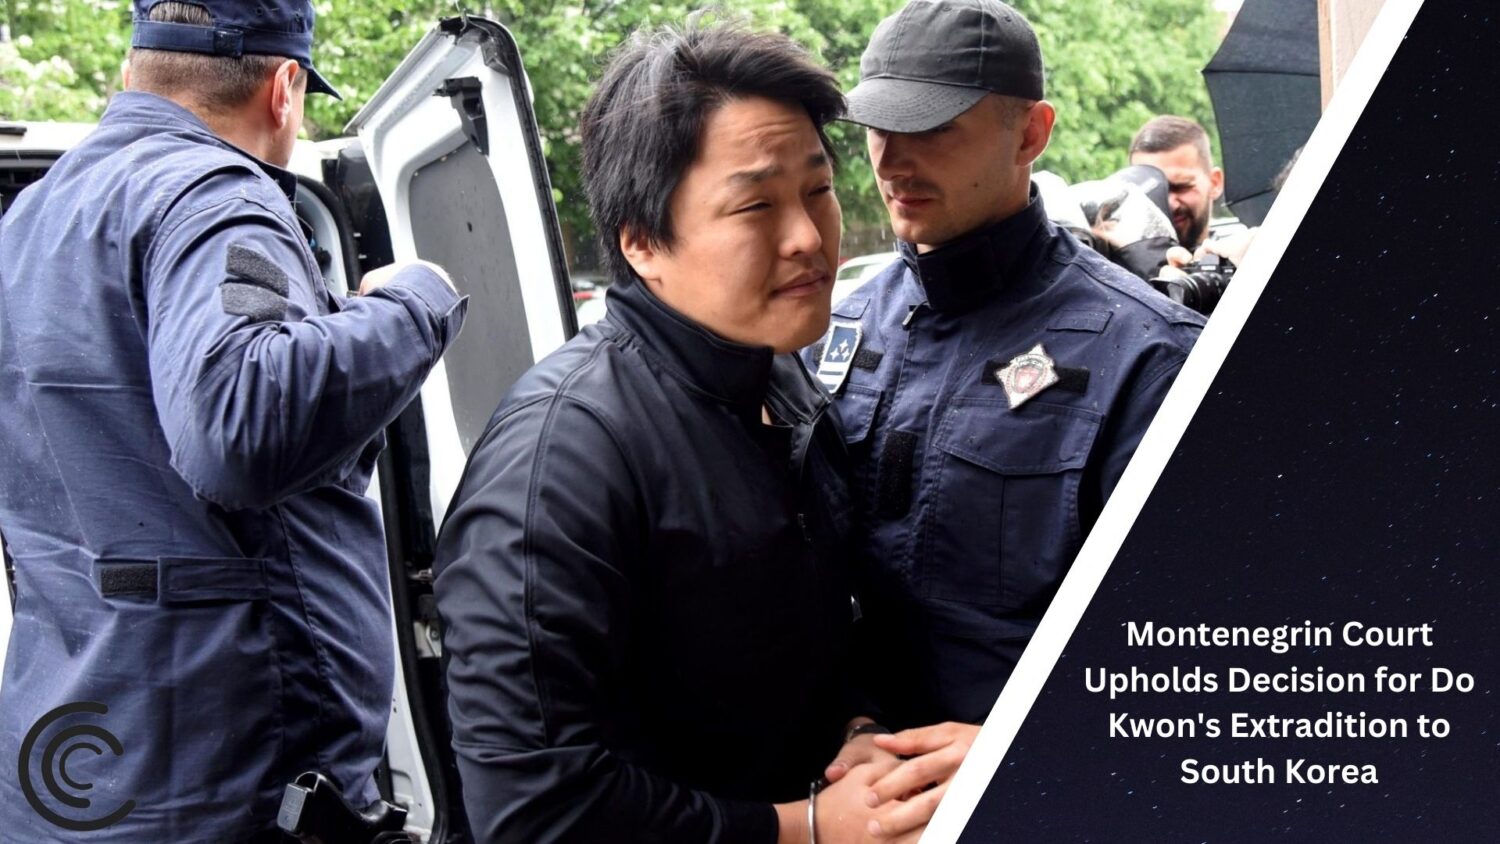 Montenegrin Court Upholds Decision For Do Kwon'S Extradition To South Korea